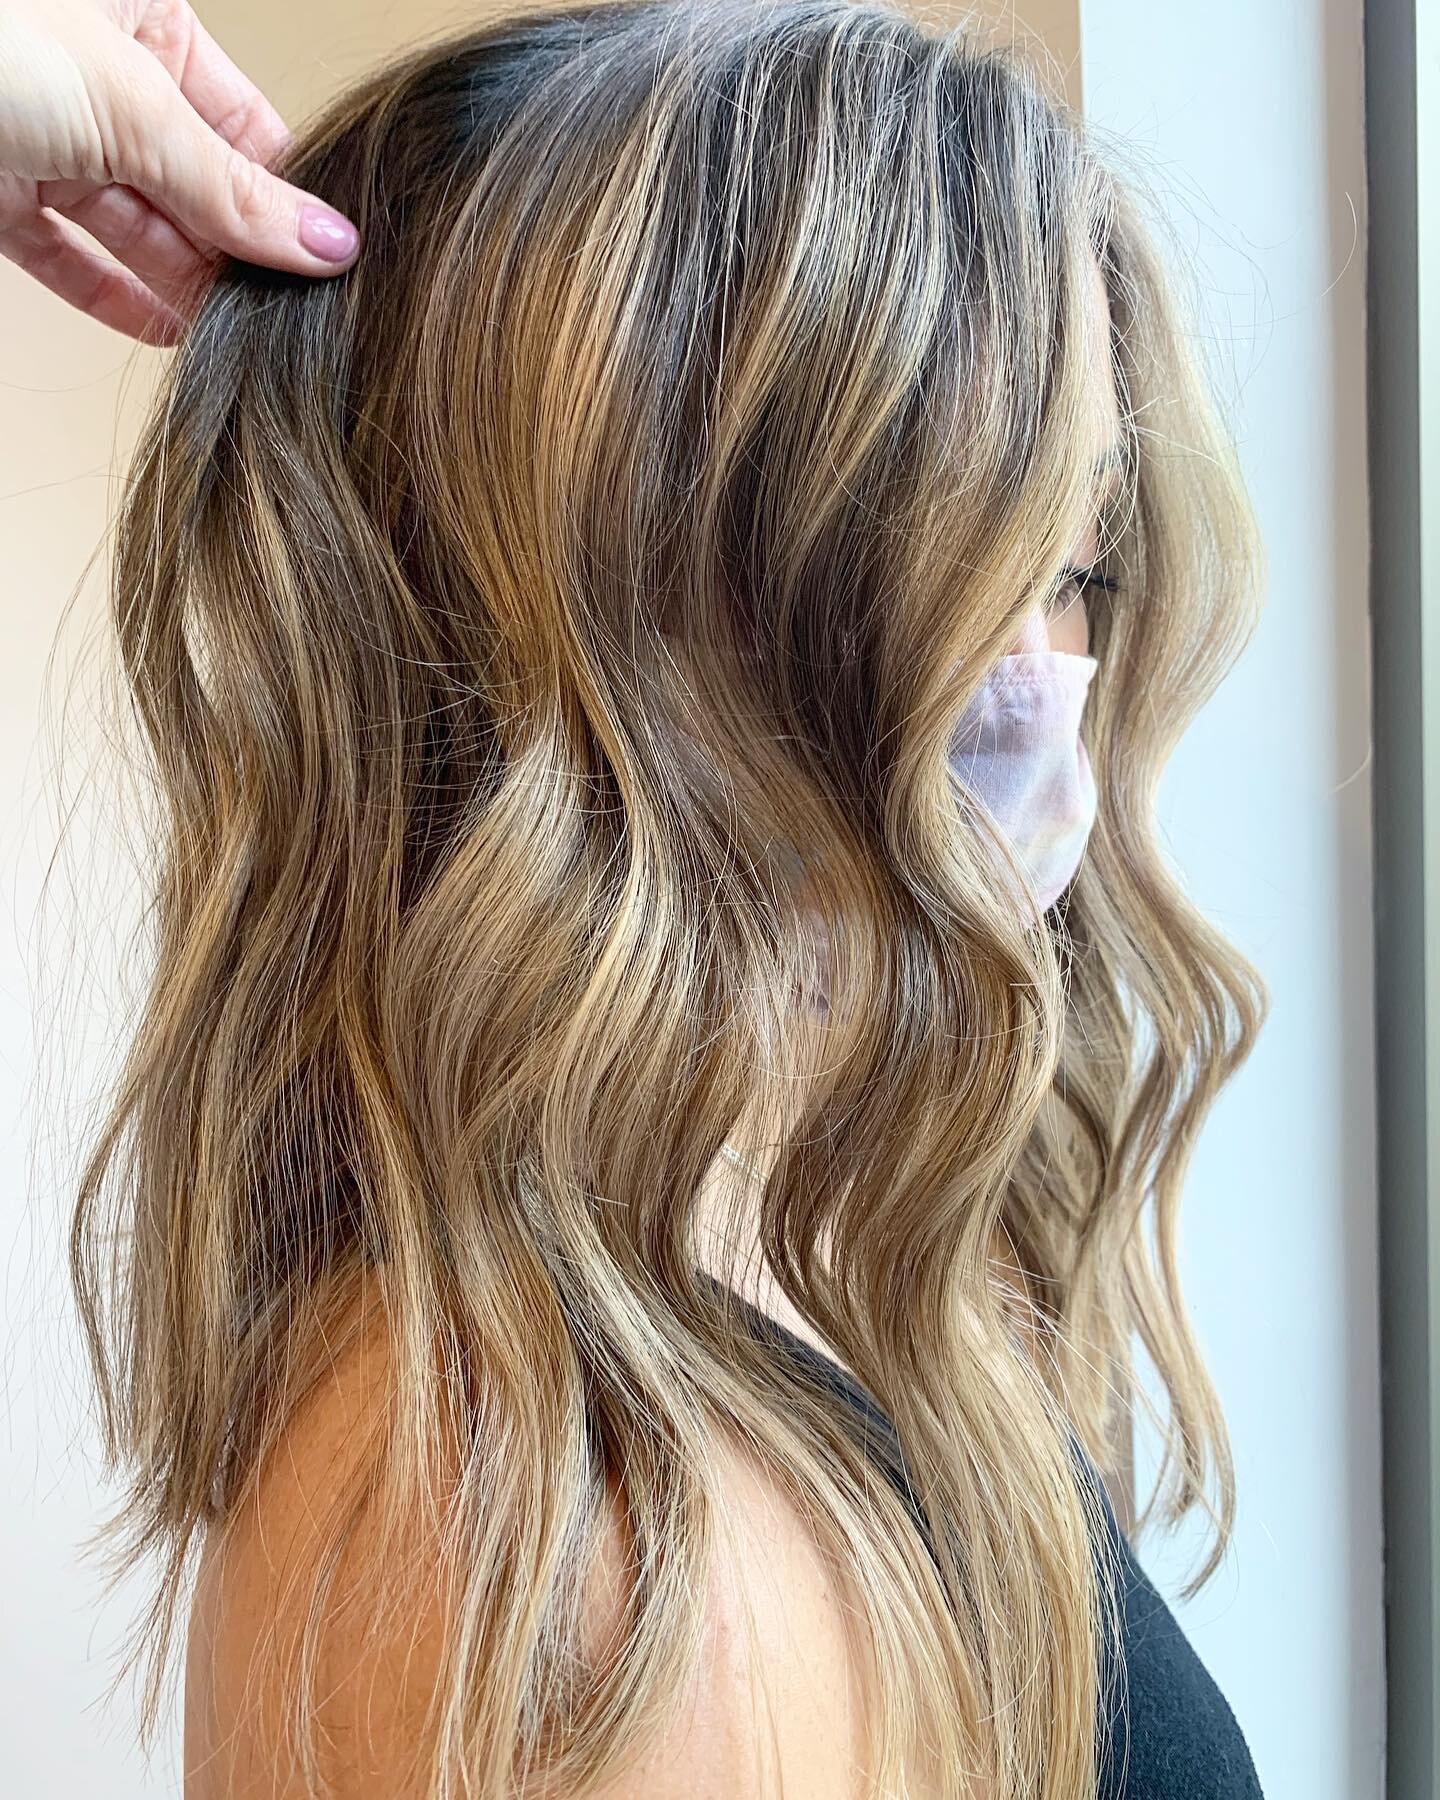 Swipe to see the before ➡️
.
Follow the link in my bio to book an appointment with me!
.
#wakeforesthairstylist #wakeforesthair #wakeforestnc #raleighhairstylist #raleighhair #raleigh #balayage #919hairstylist #919balayage #blondebalayage #blonding #